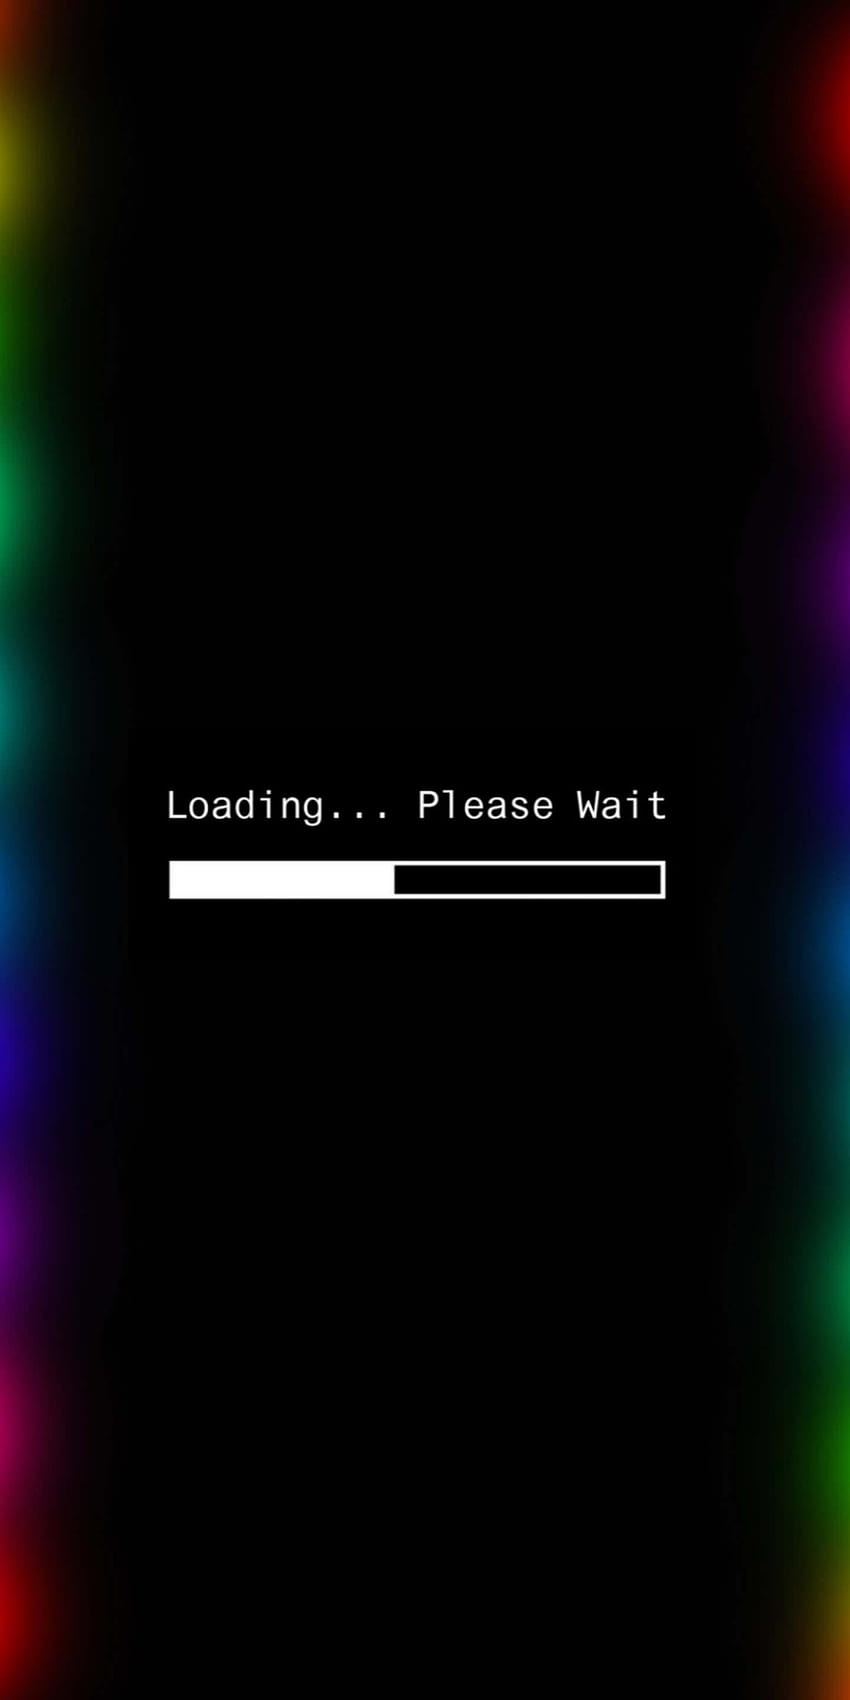 15 Latest and Best Loading Animations to Make User Enjoy Waiting | by Annie  Dai | HackerNoon.com | Medium